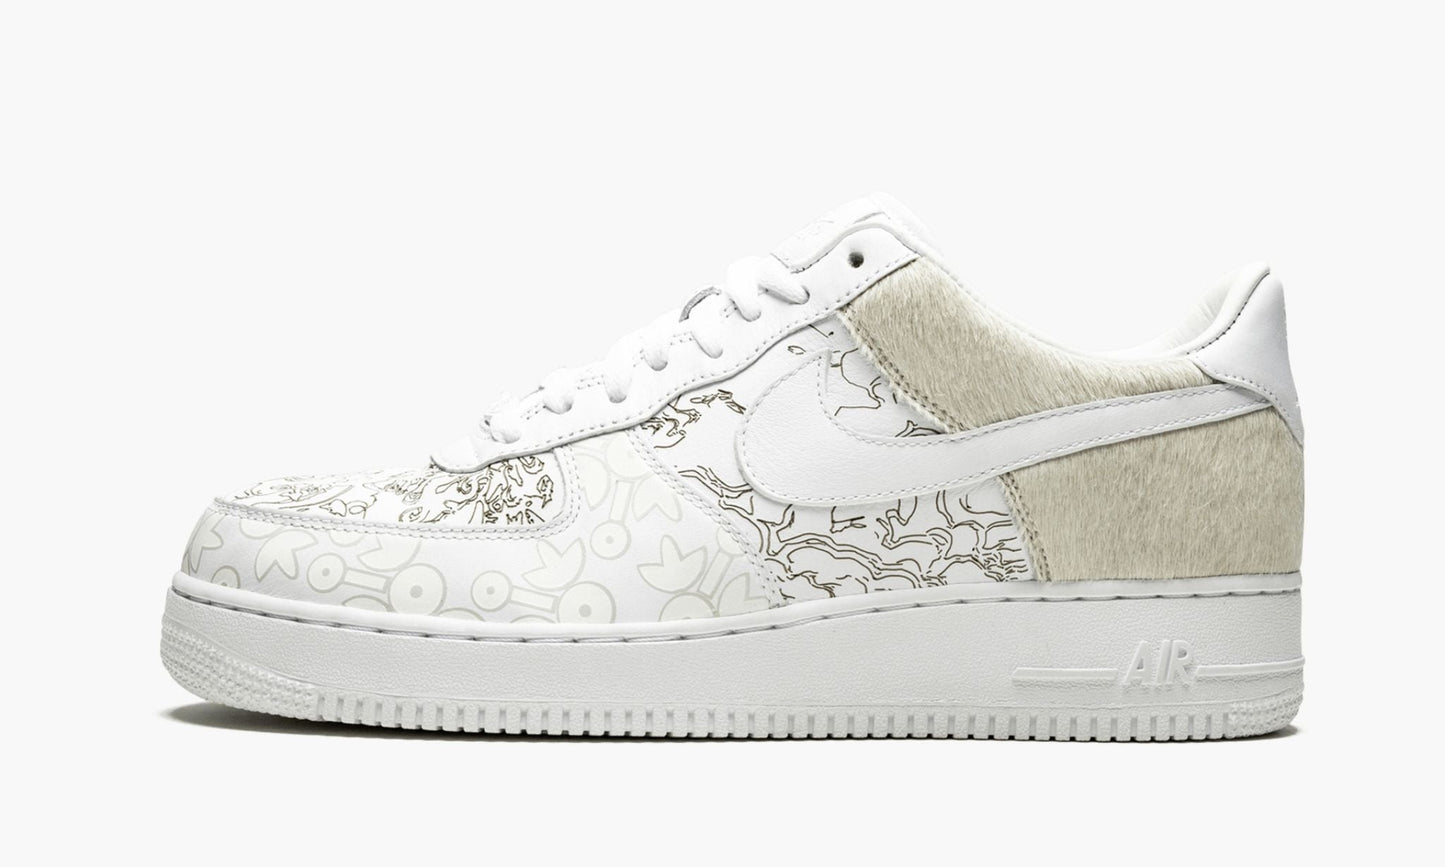 Air Force 1 PRM YOTD '18 "Year of the Dog"